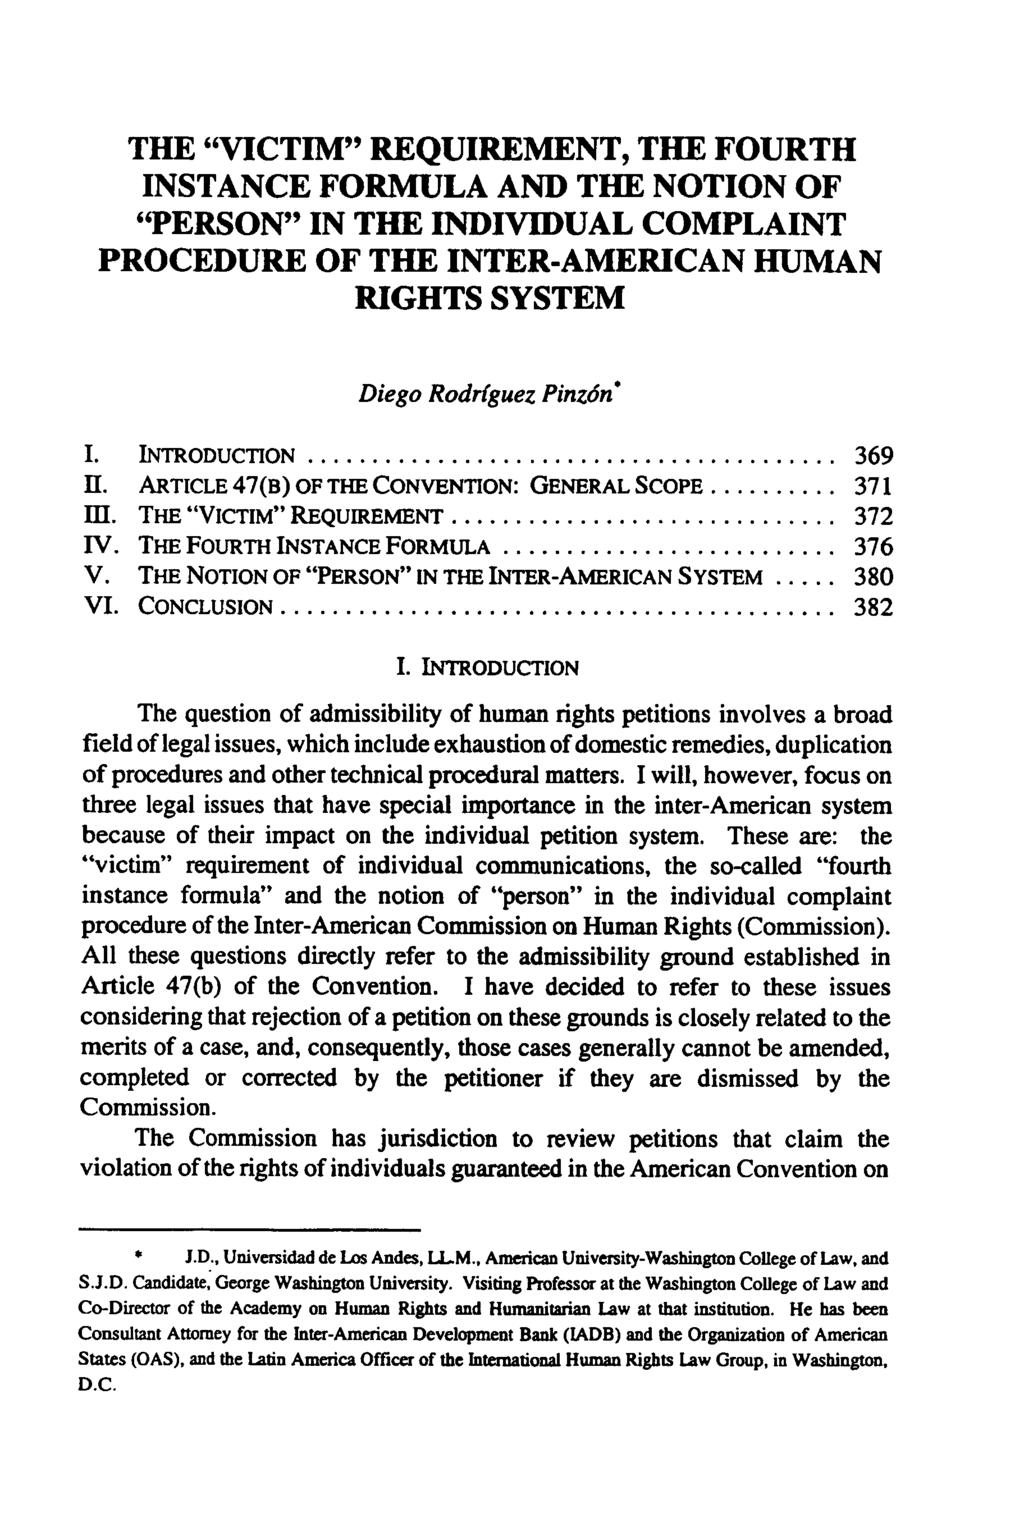 THE "VICTIM" REQUIREMENT, THE FOURTH INSTANCE FORMULA AND THE NOTION OF "PERSON" IN THE INDIVIDUAL COMPLAINT PROCEDURE OF THE INTER-AMERICAN HUMAN RIGHTS SYSTEM Diego Rodriguez Pinzdn" I.